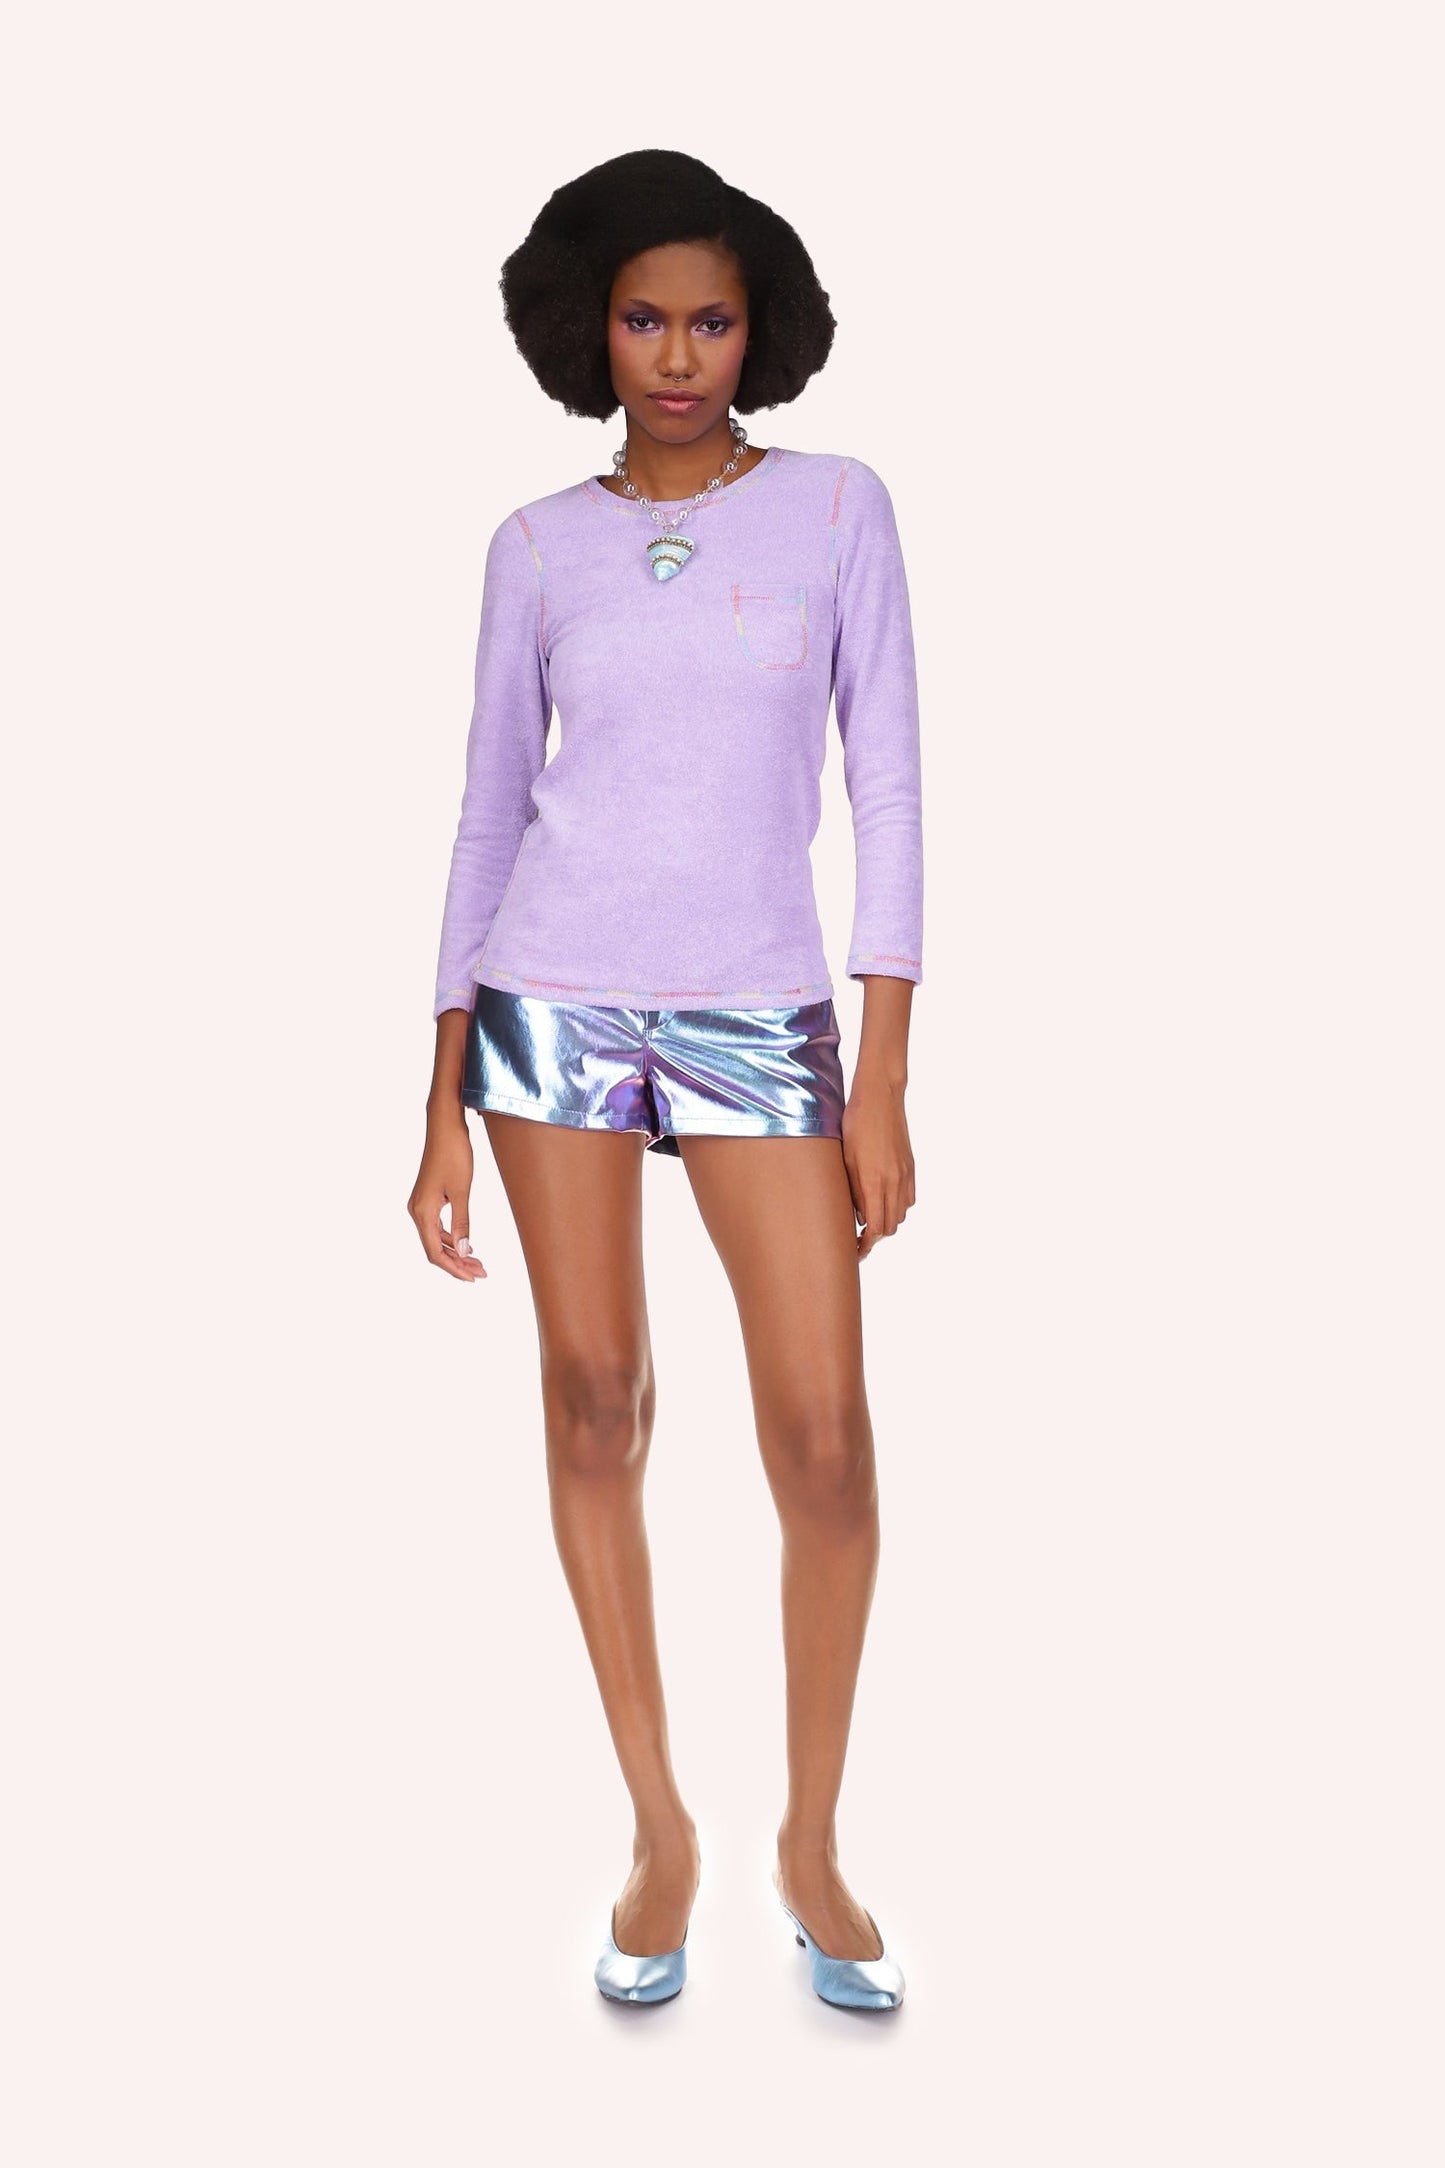 Terrycloth Long Sleeve Top, orchid, round collar, rainbow hems, pocket on left of chest.